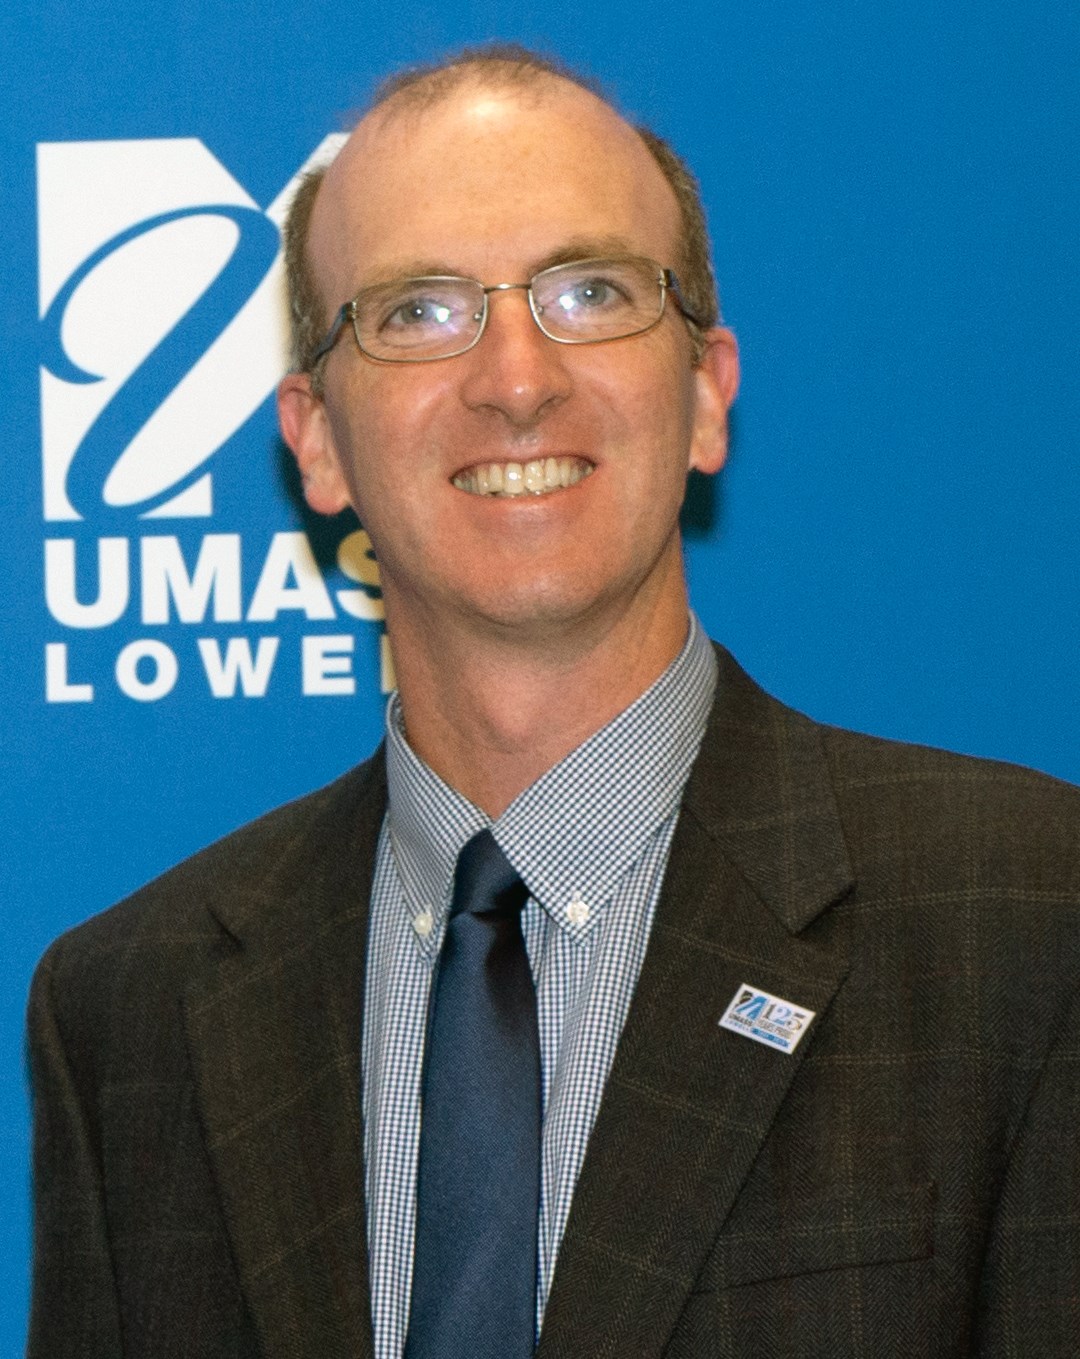 Greg Denon is the Associate Dean of Student Affairs, Career Development in the Career Services & Cooperative Education Department at UMass Lowell.